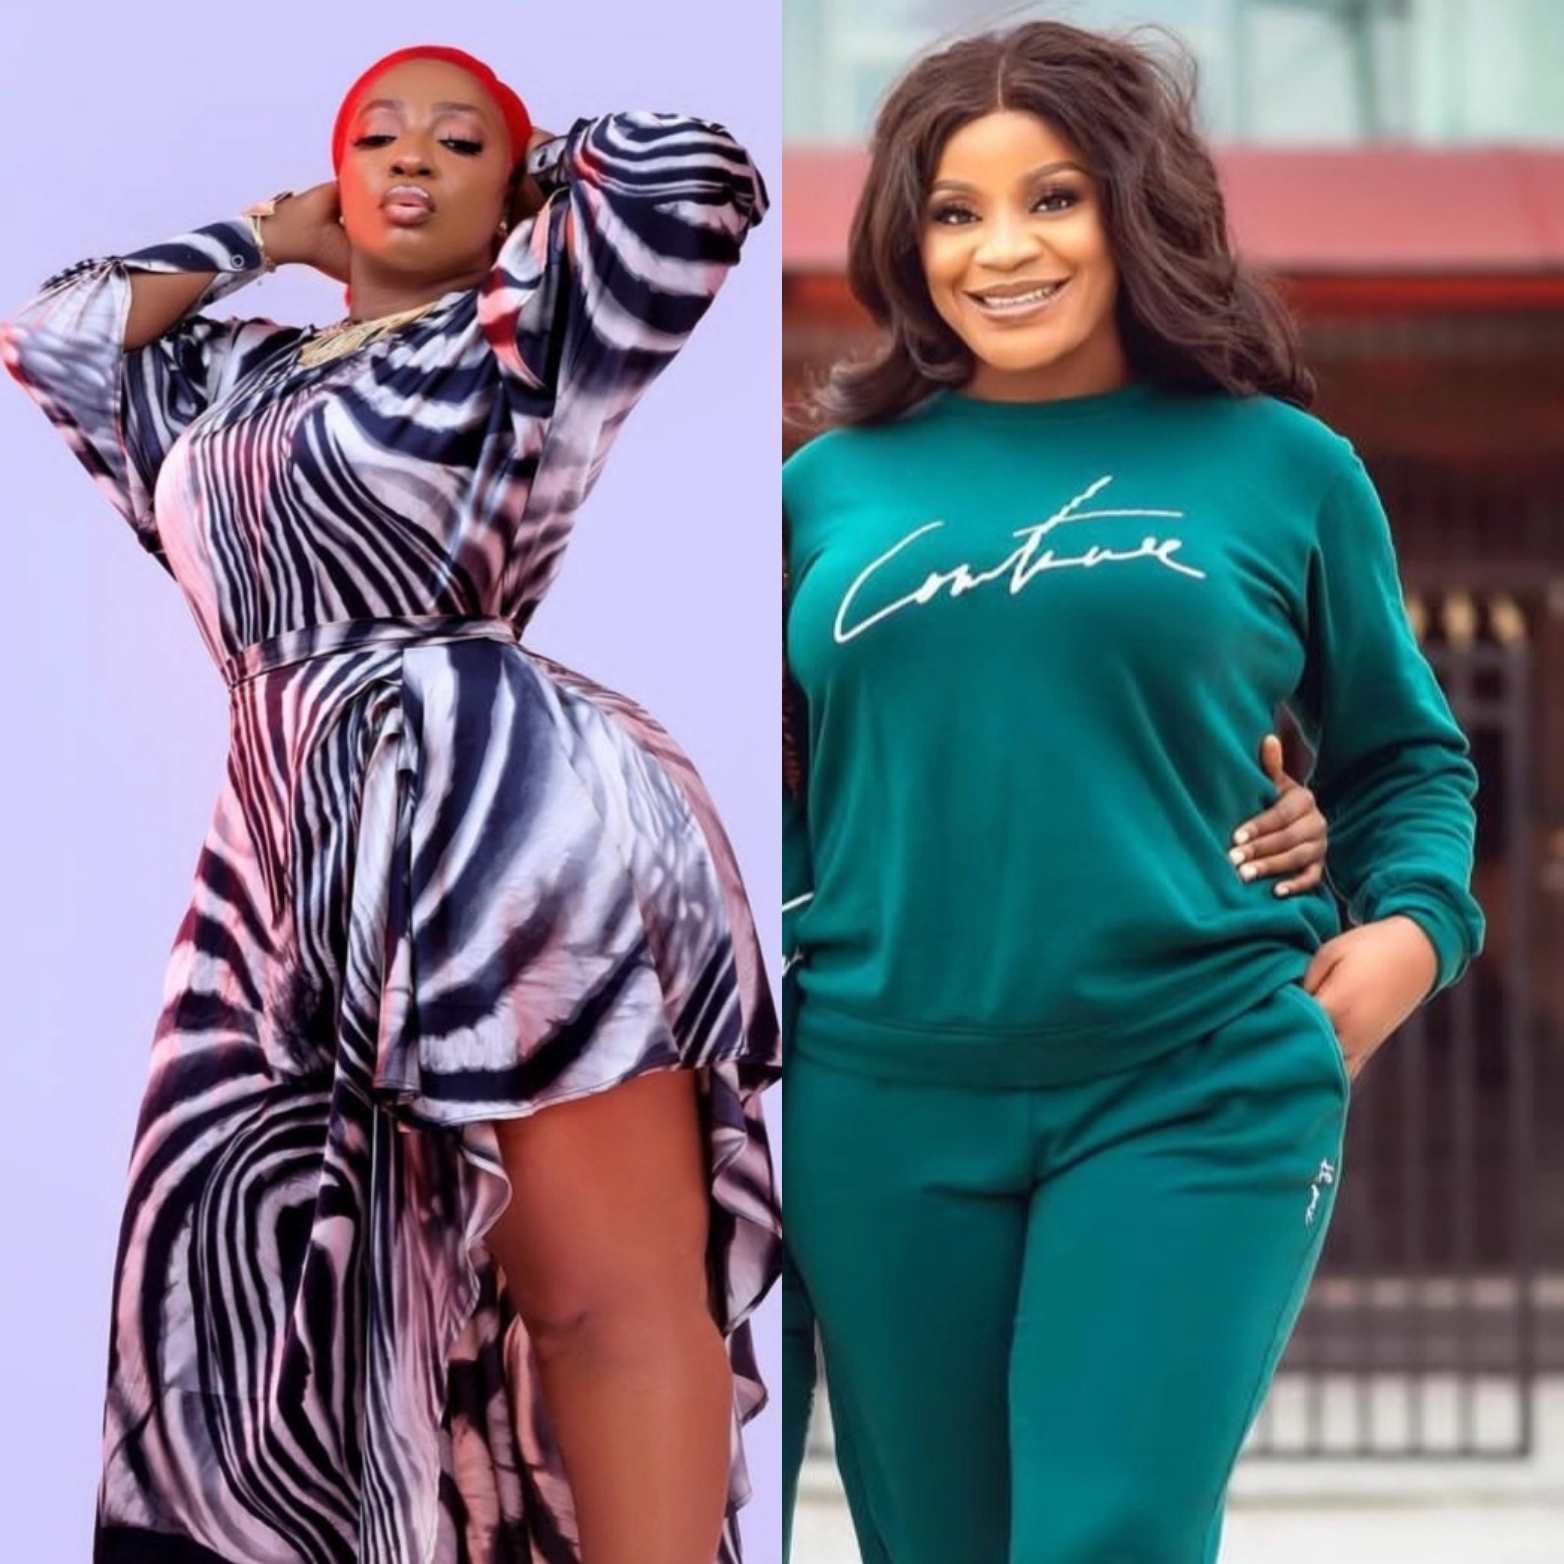 Actress Uche Ogbodo And Anita Joseph Trade Words Over Uche’s Stance On False Rape Accusation